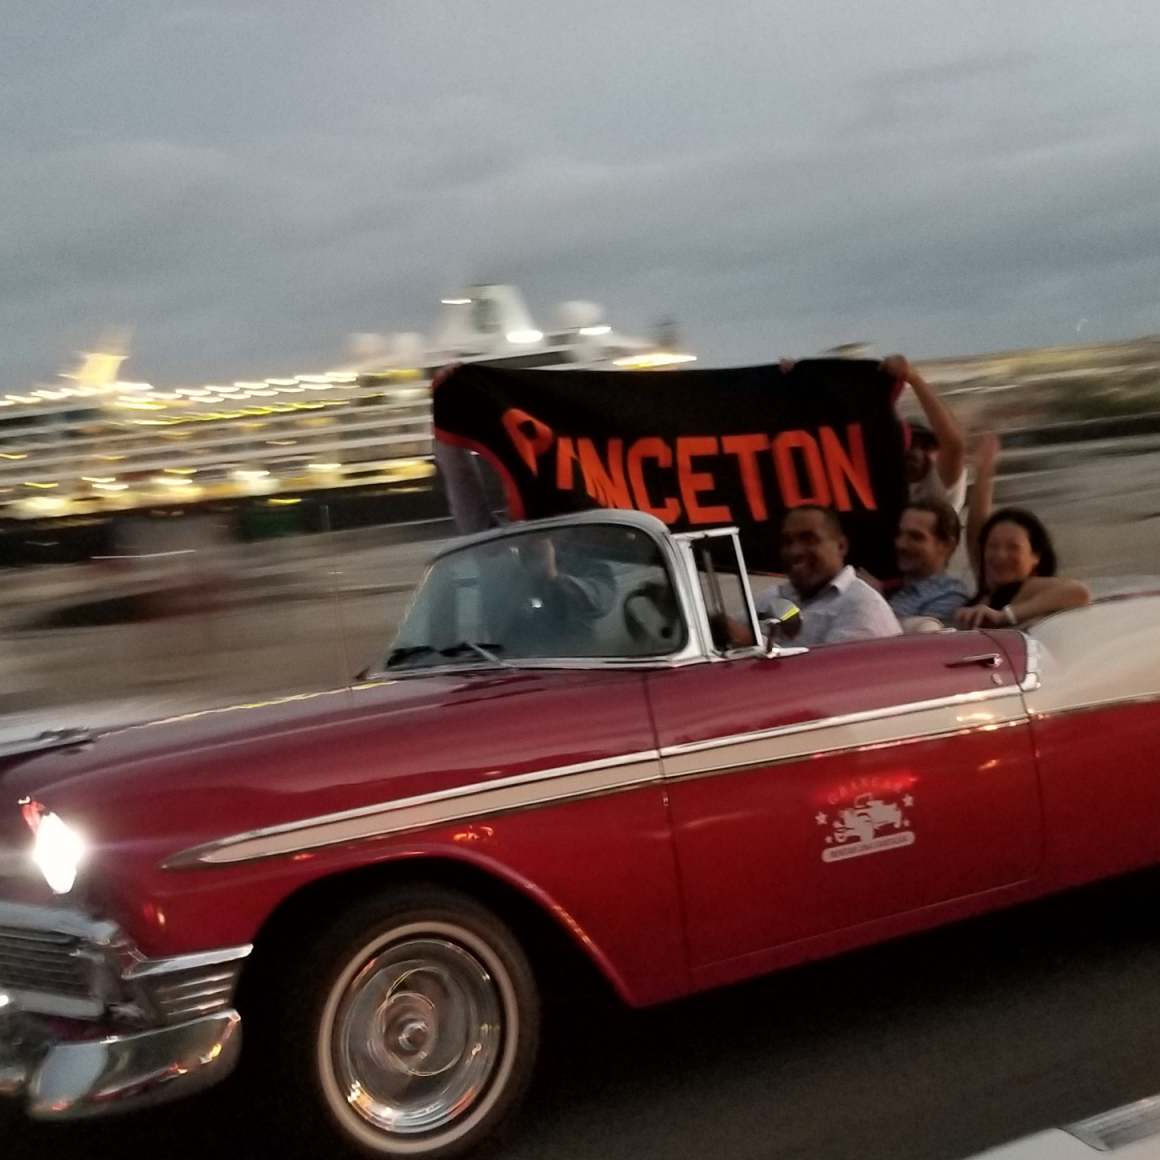 Travelers with Princeton banner driving red vintage car in Cuba